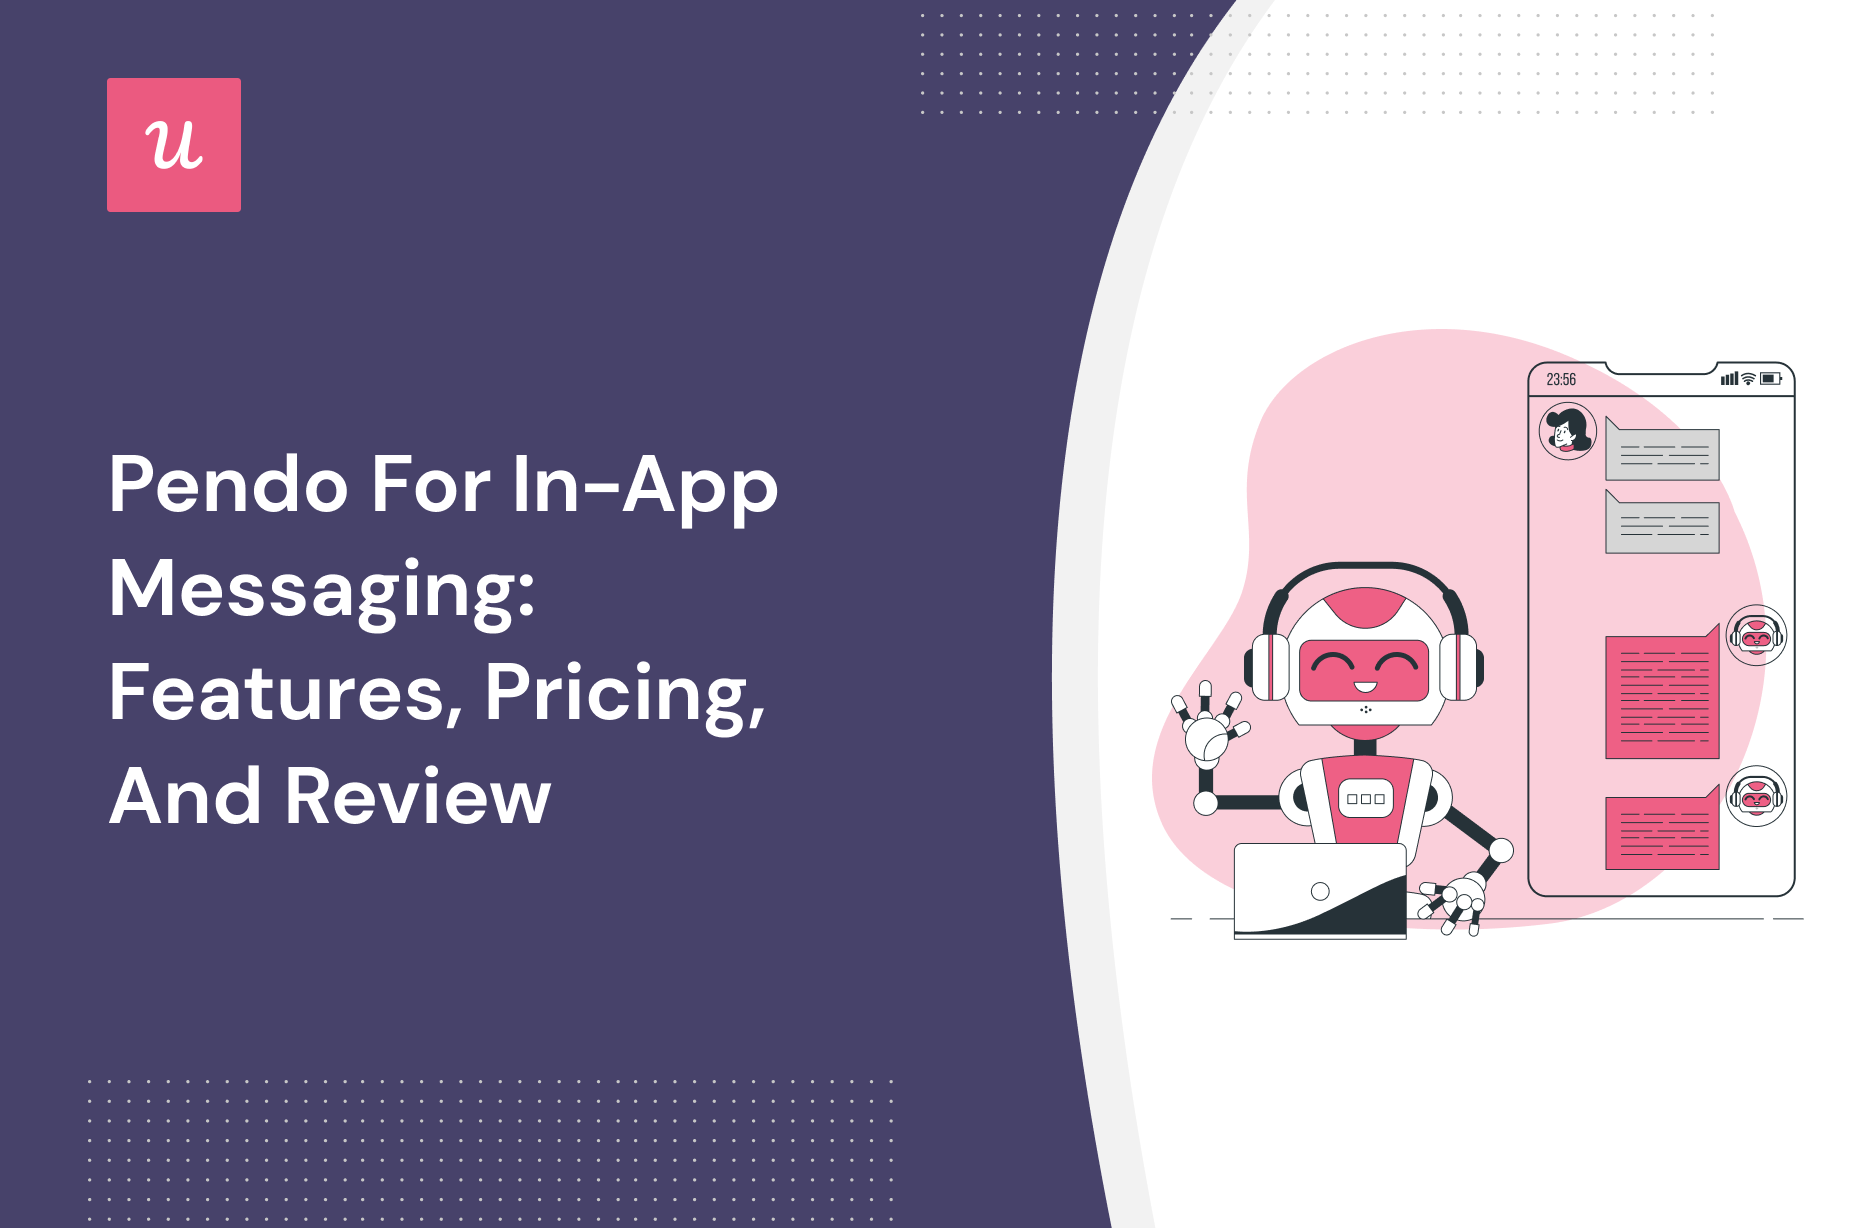 Pendo for In-App Messaging: Features, Pricing, and Review